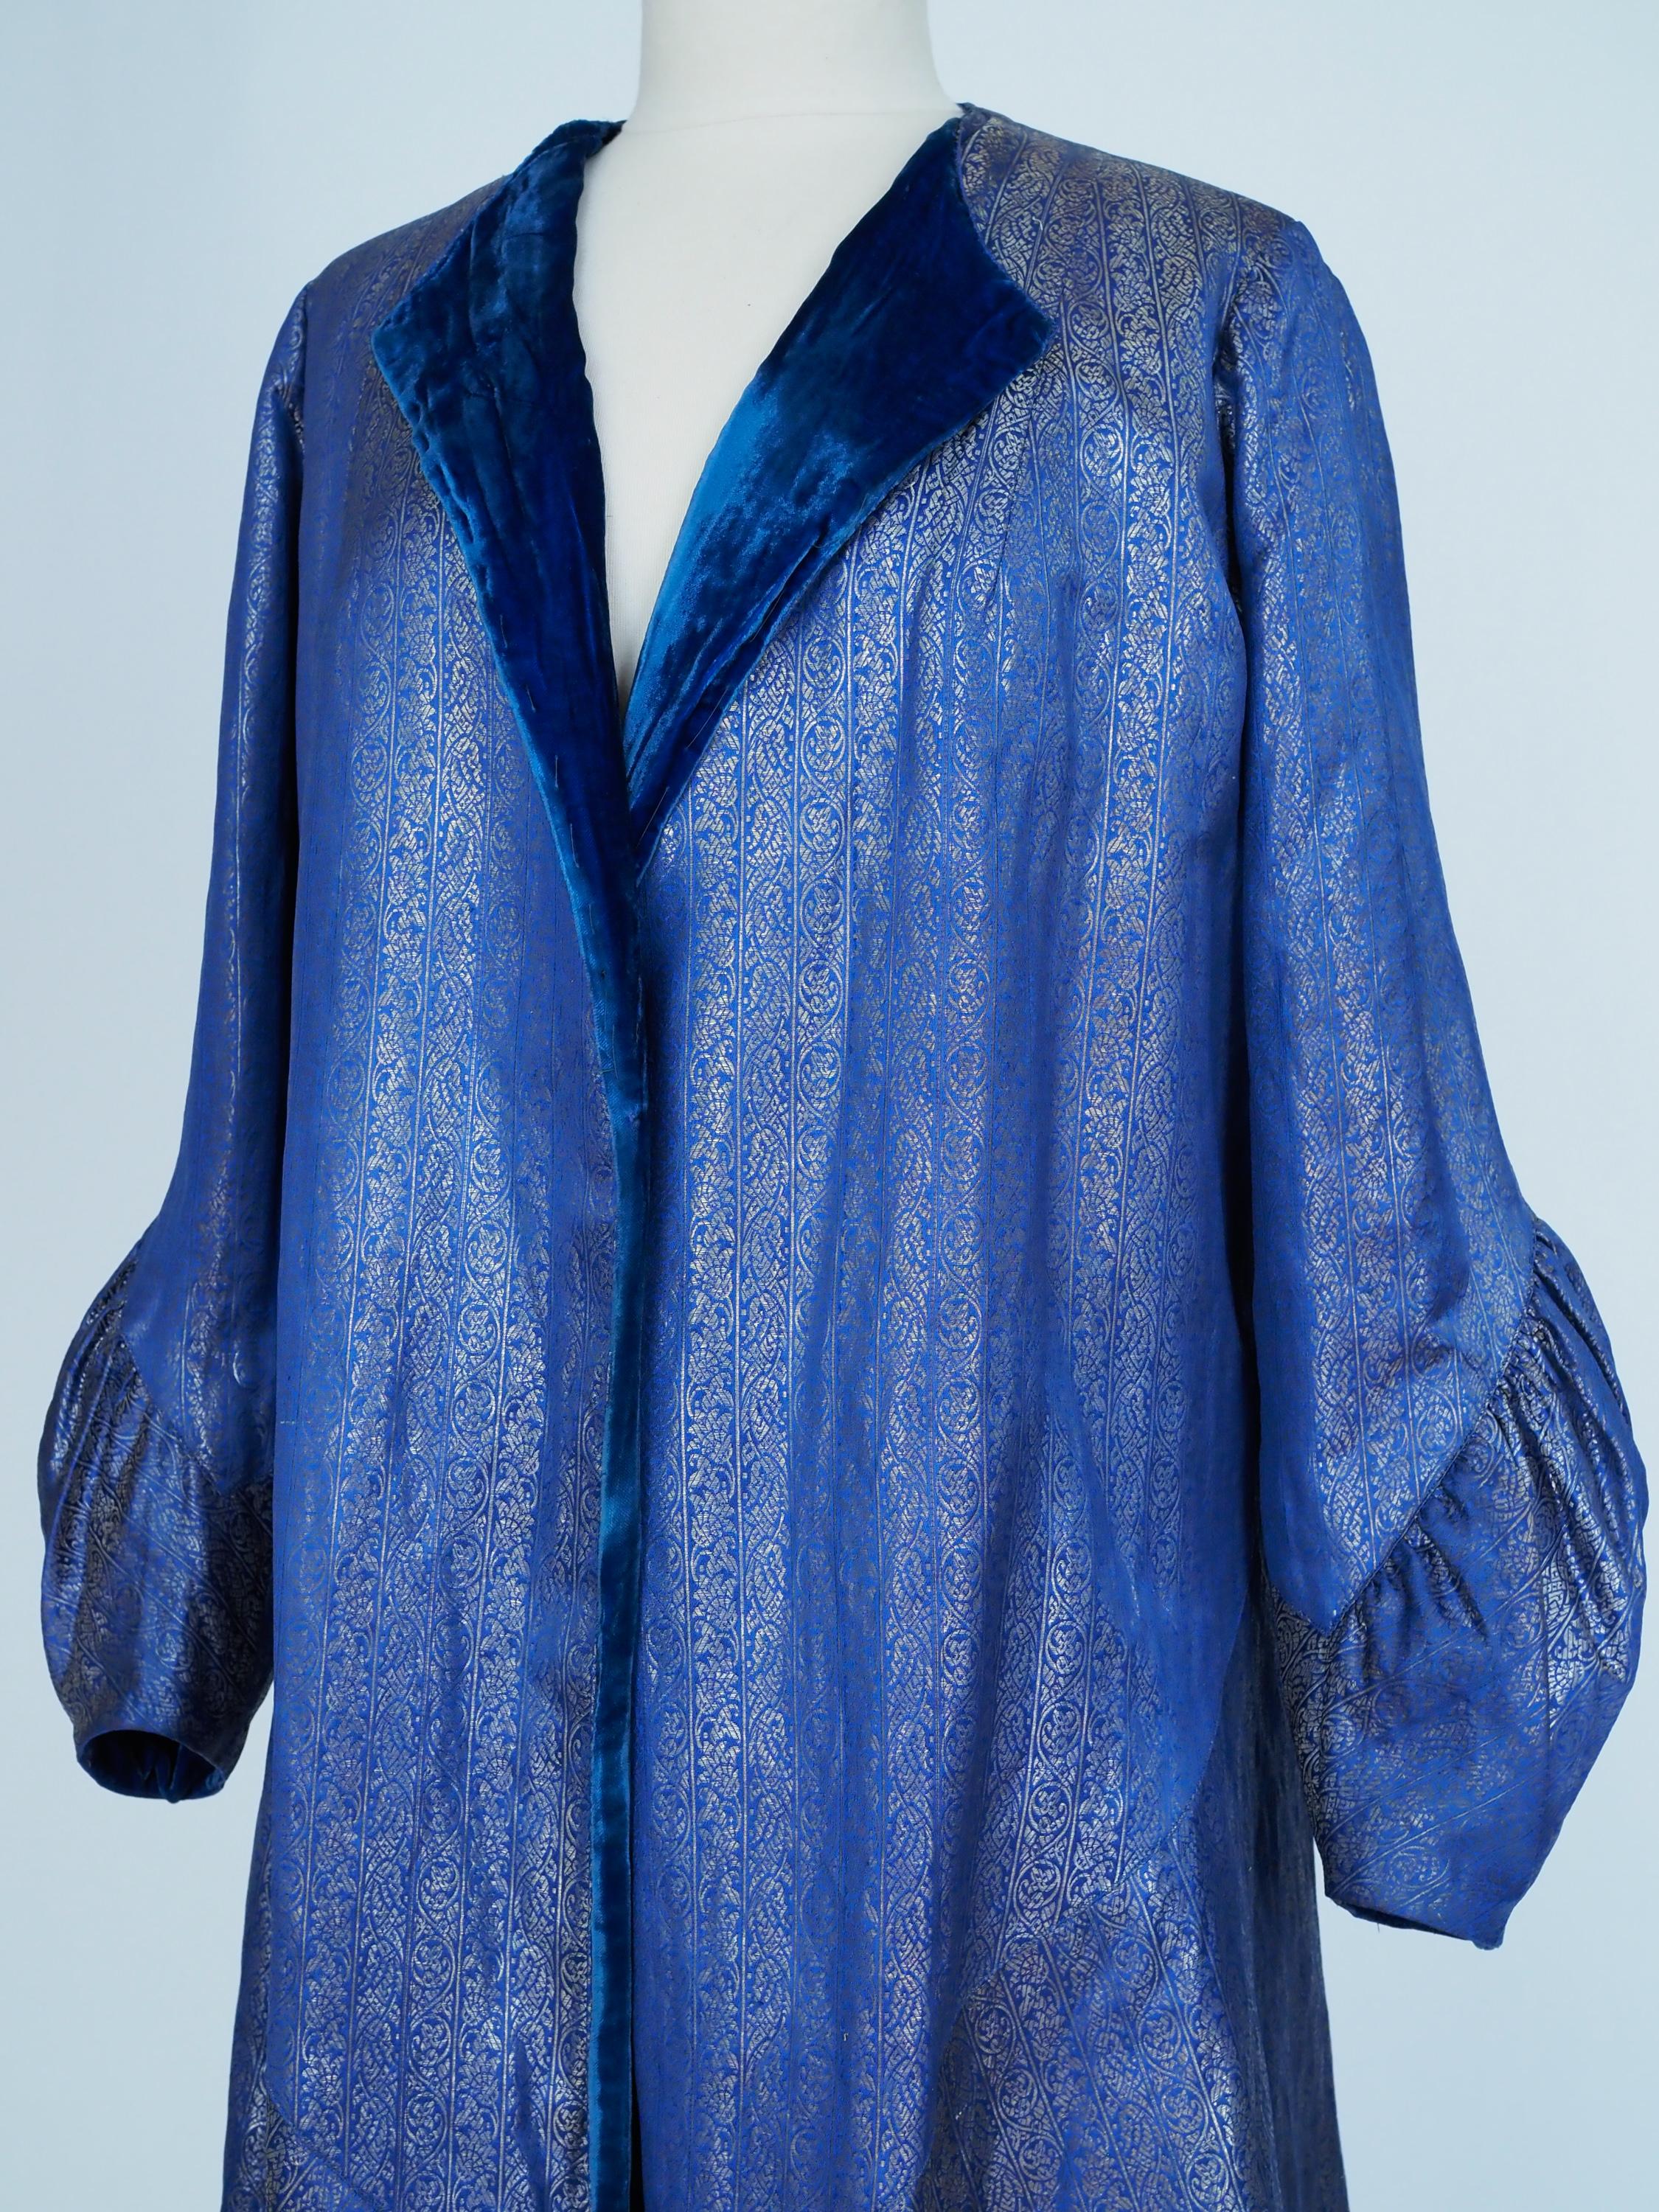 Evening Couture coat in silver lamé by Germaine Lecomte N°03871 Paris Circa 1930 For Sale 4